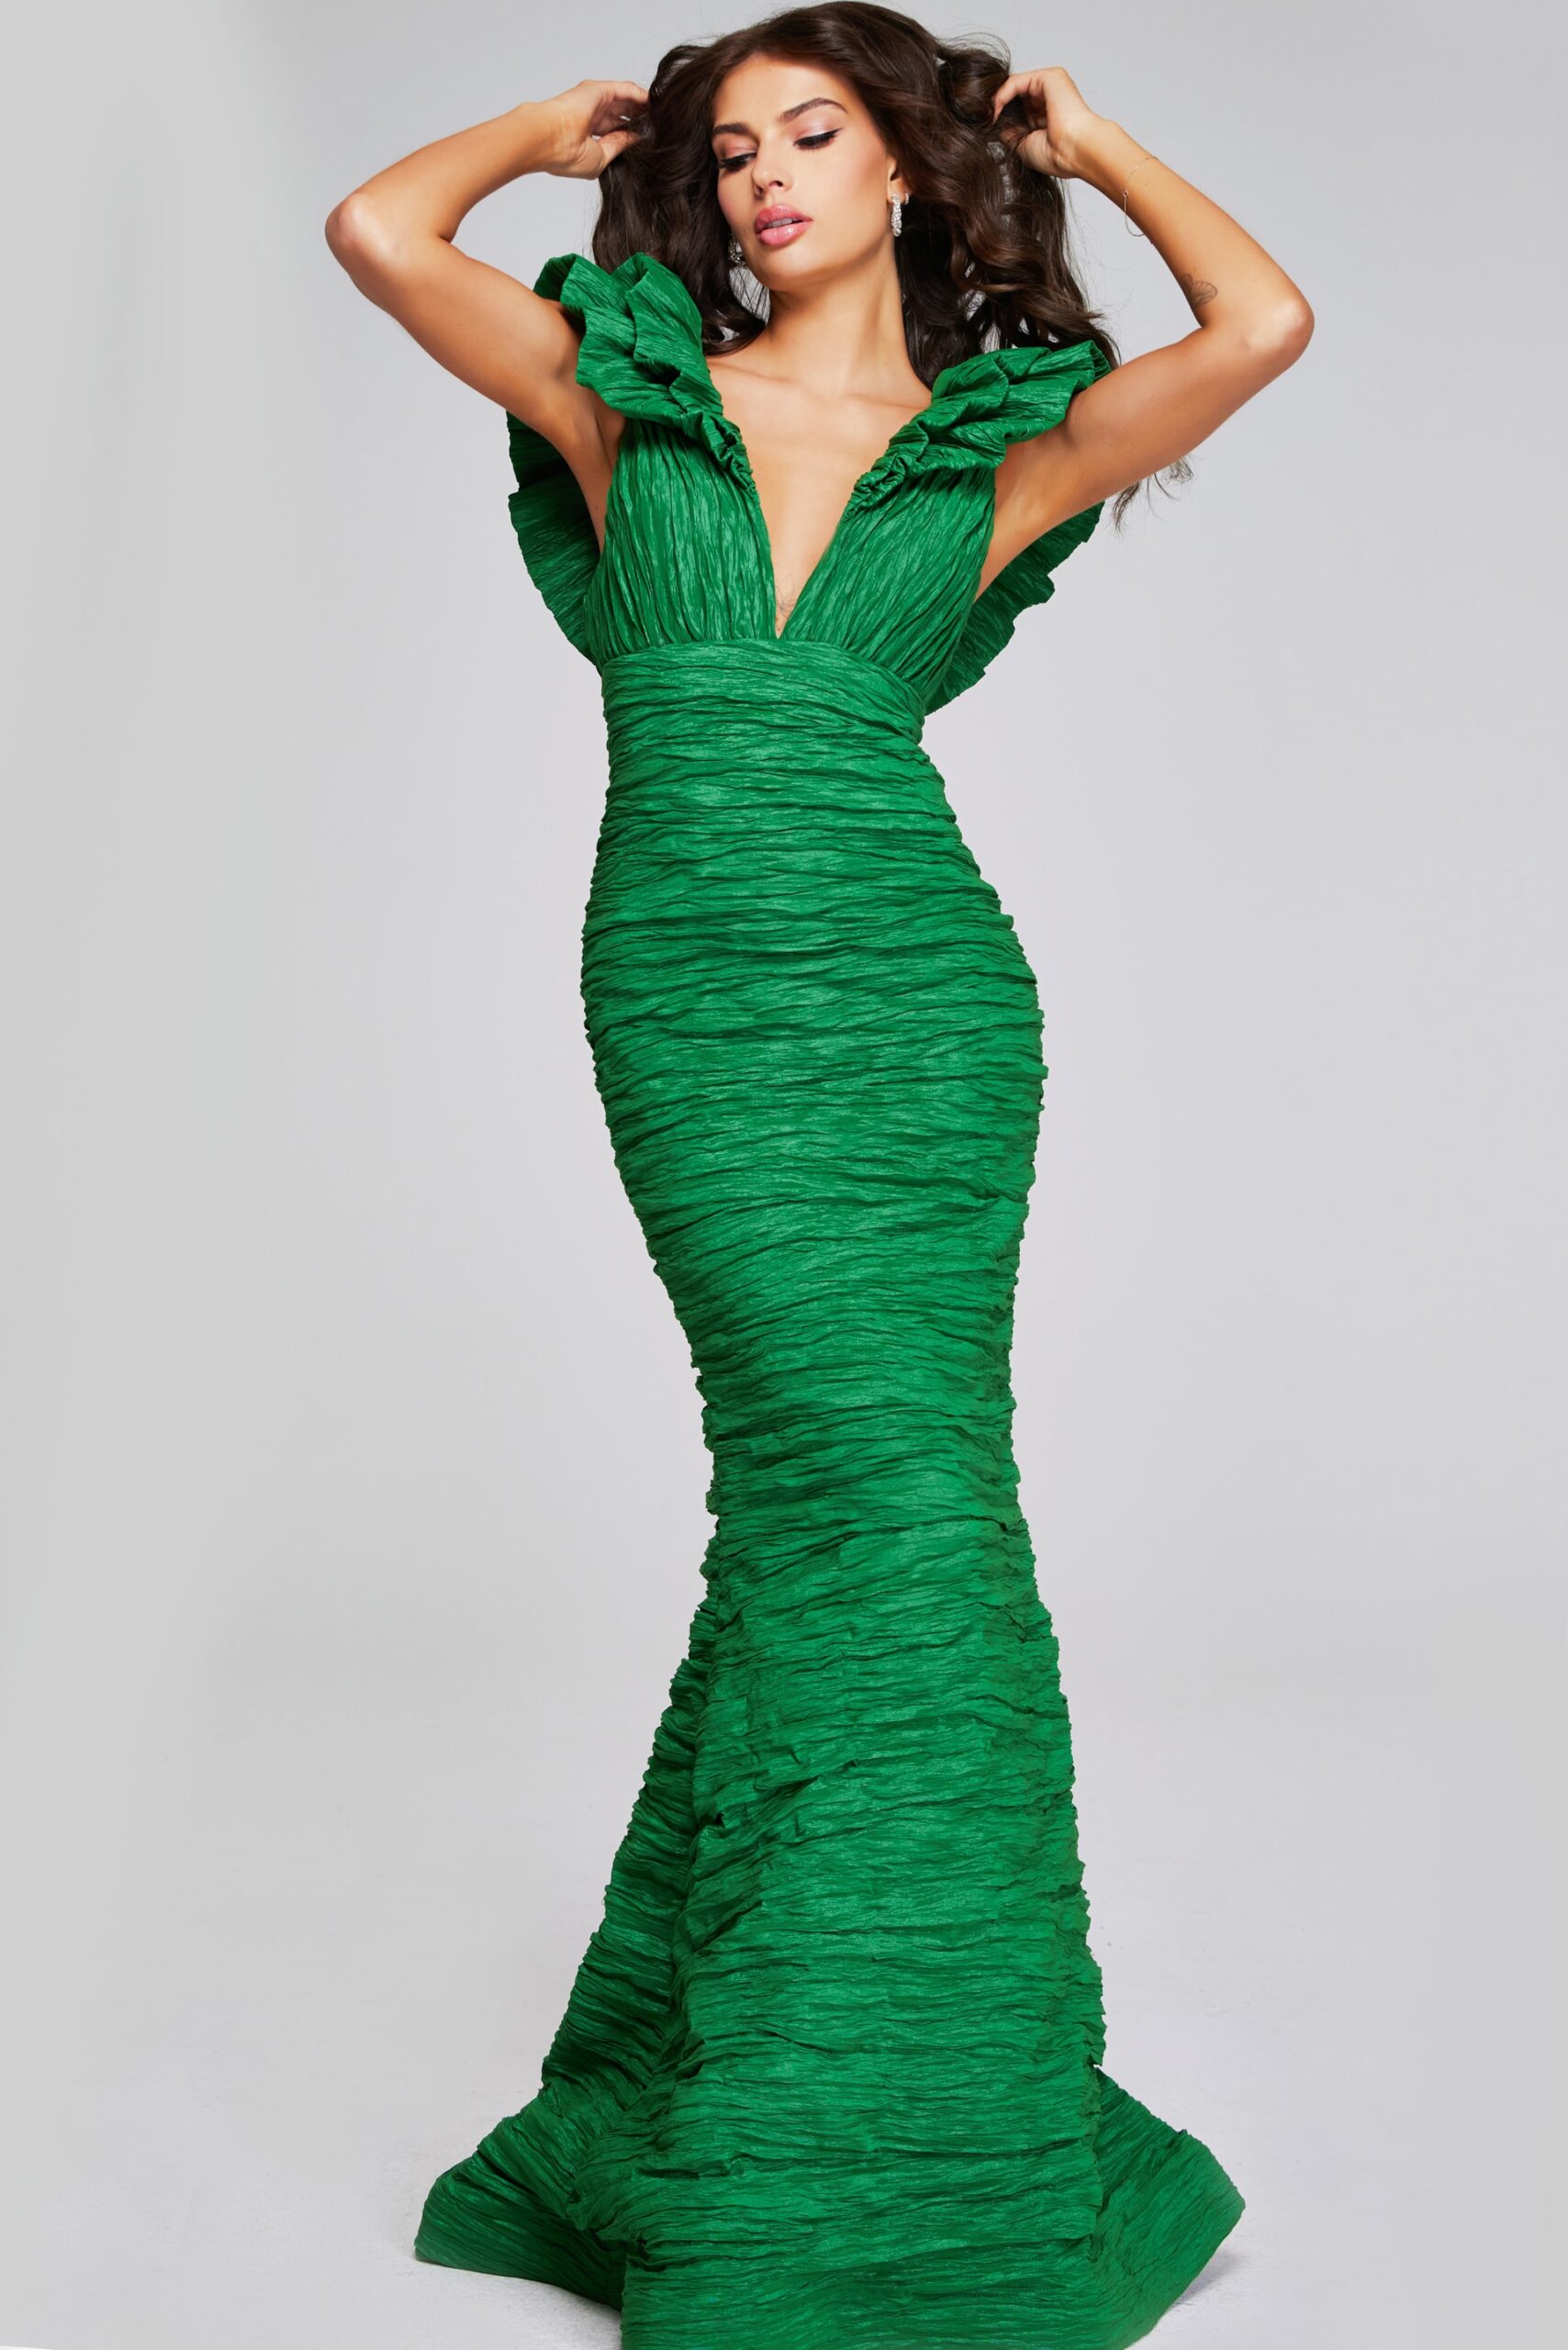 Model wearing Green Textured Mermaid Gown with Ruffled Sleeves 40044